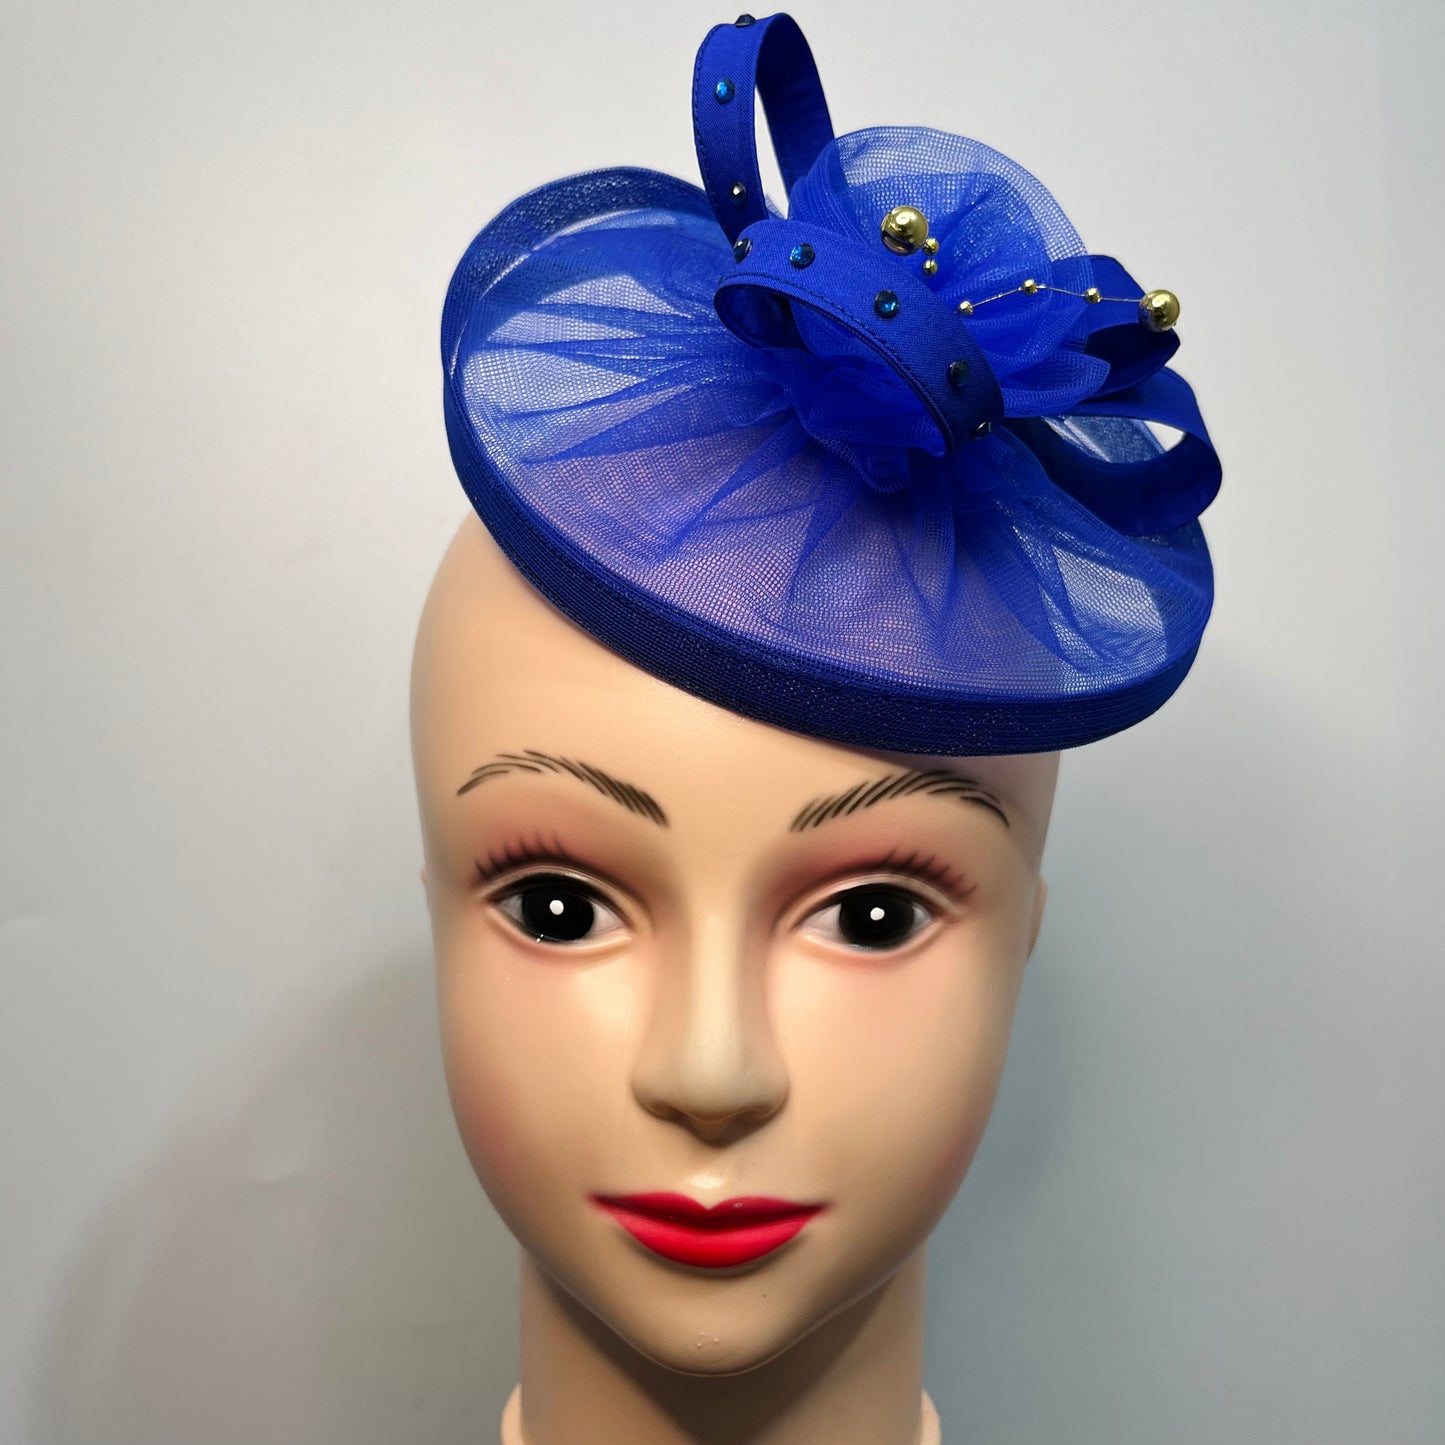 Royal Blue Fascinator Hat | Couture headpiece